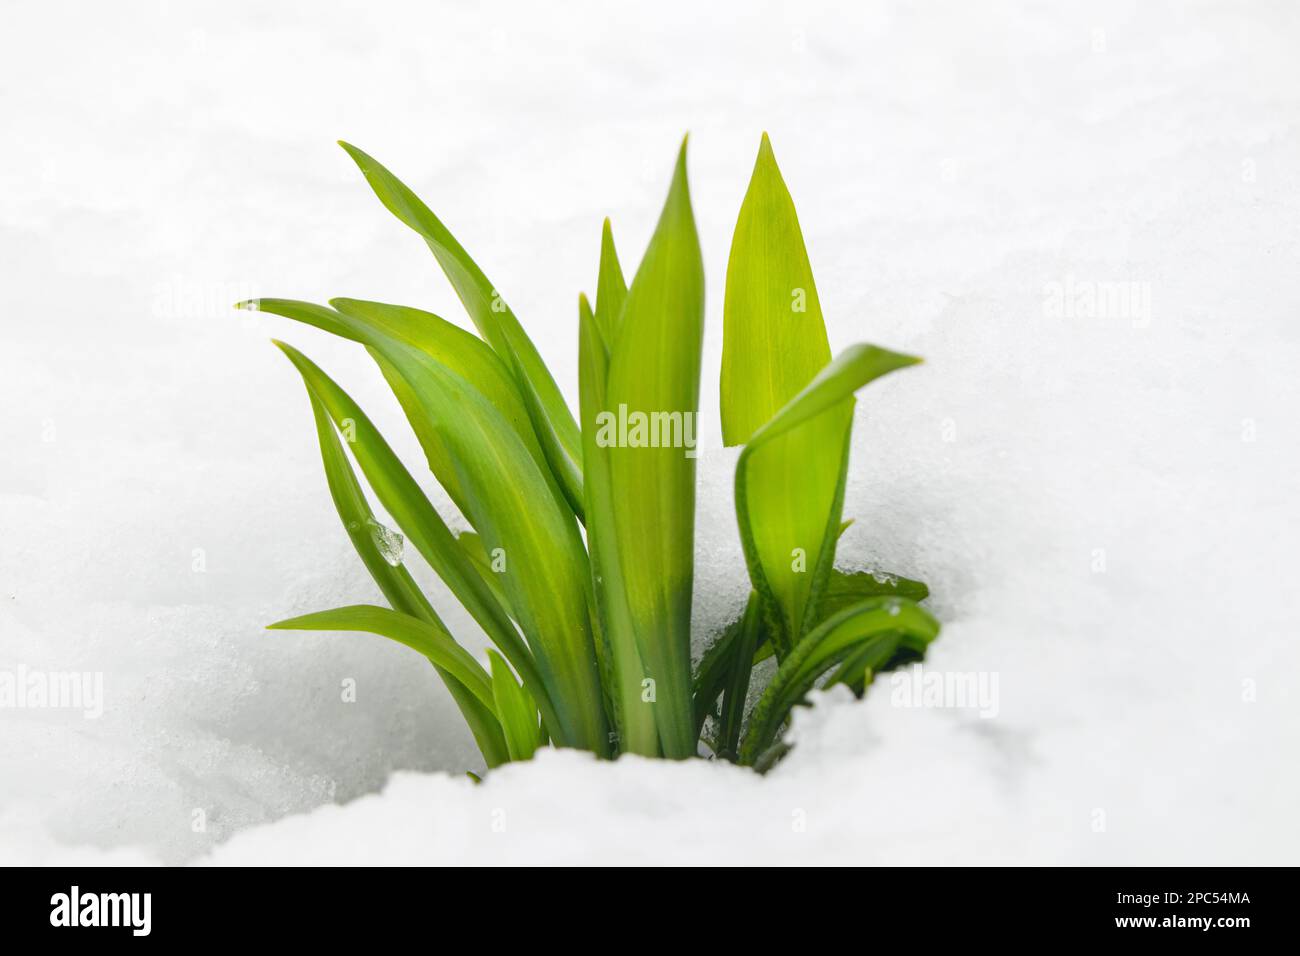 Ramsons (Allium ursinum) leaves pushing their way through snow after a late winter snowstorm, Teesdale County Durham, UK Stock Photo